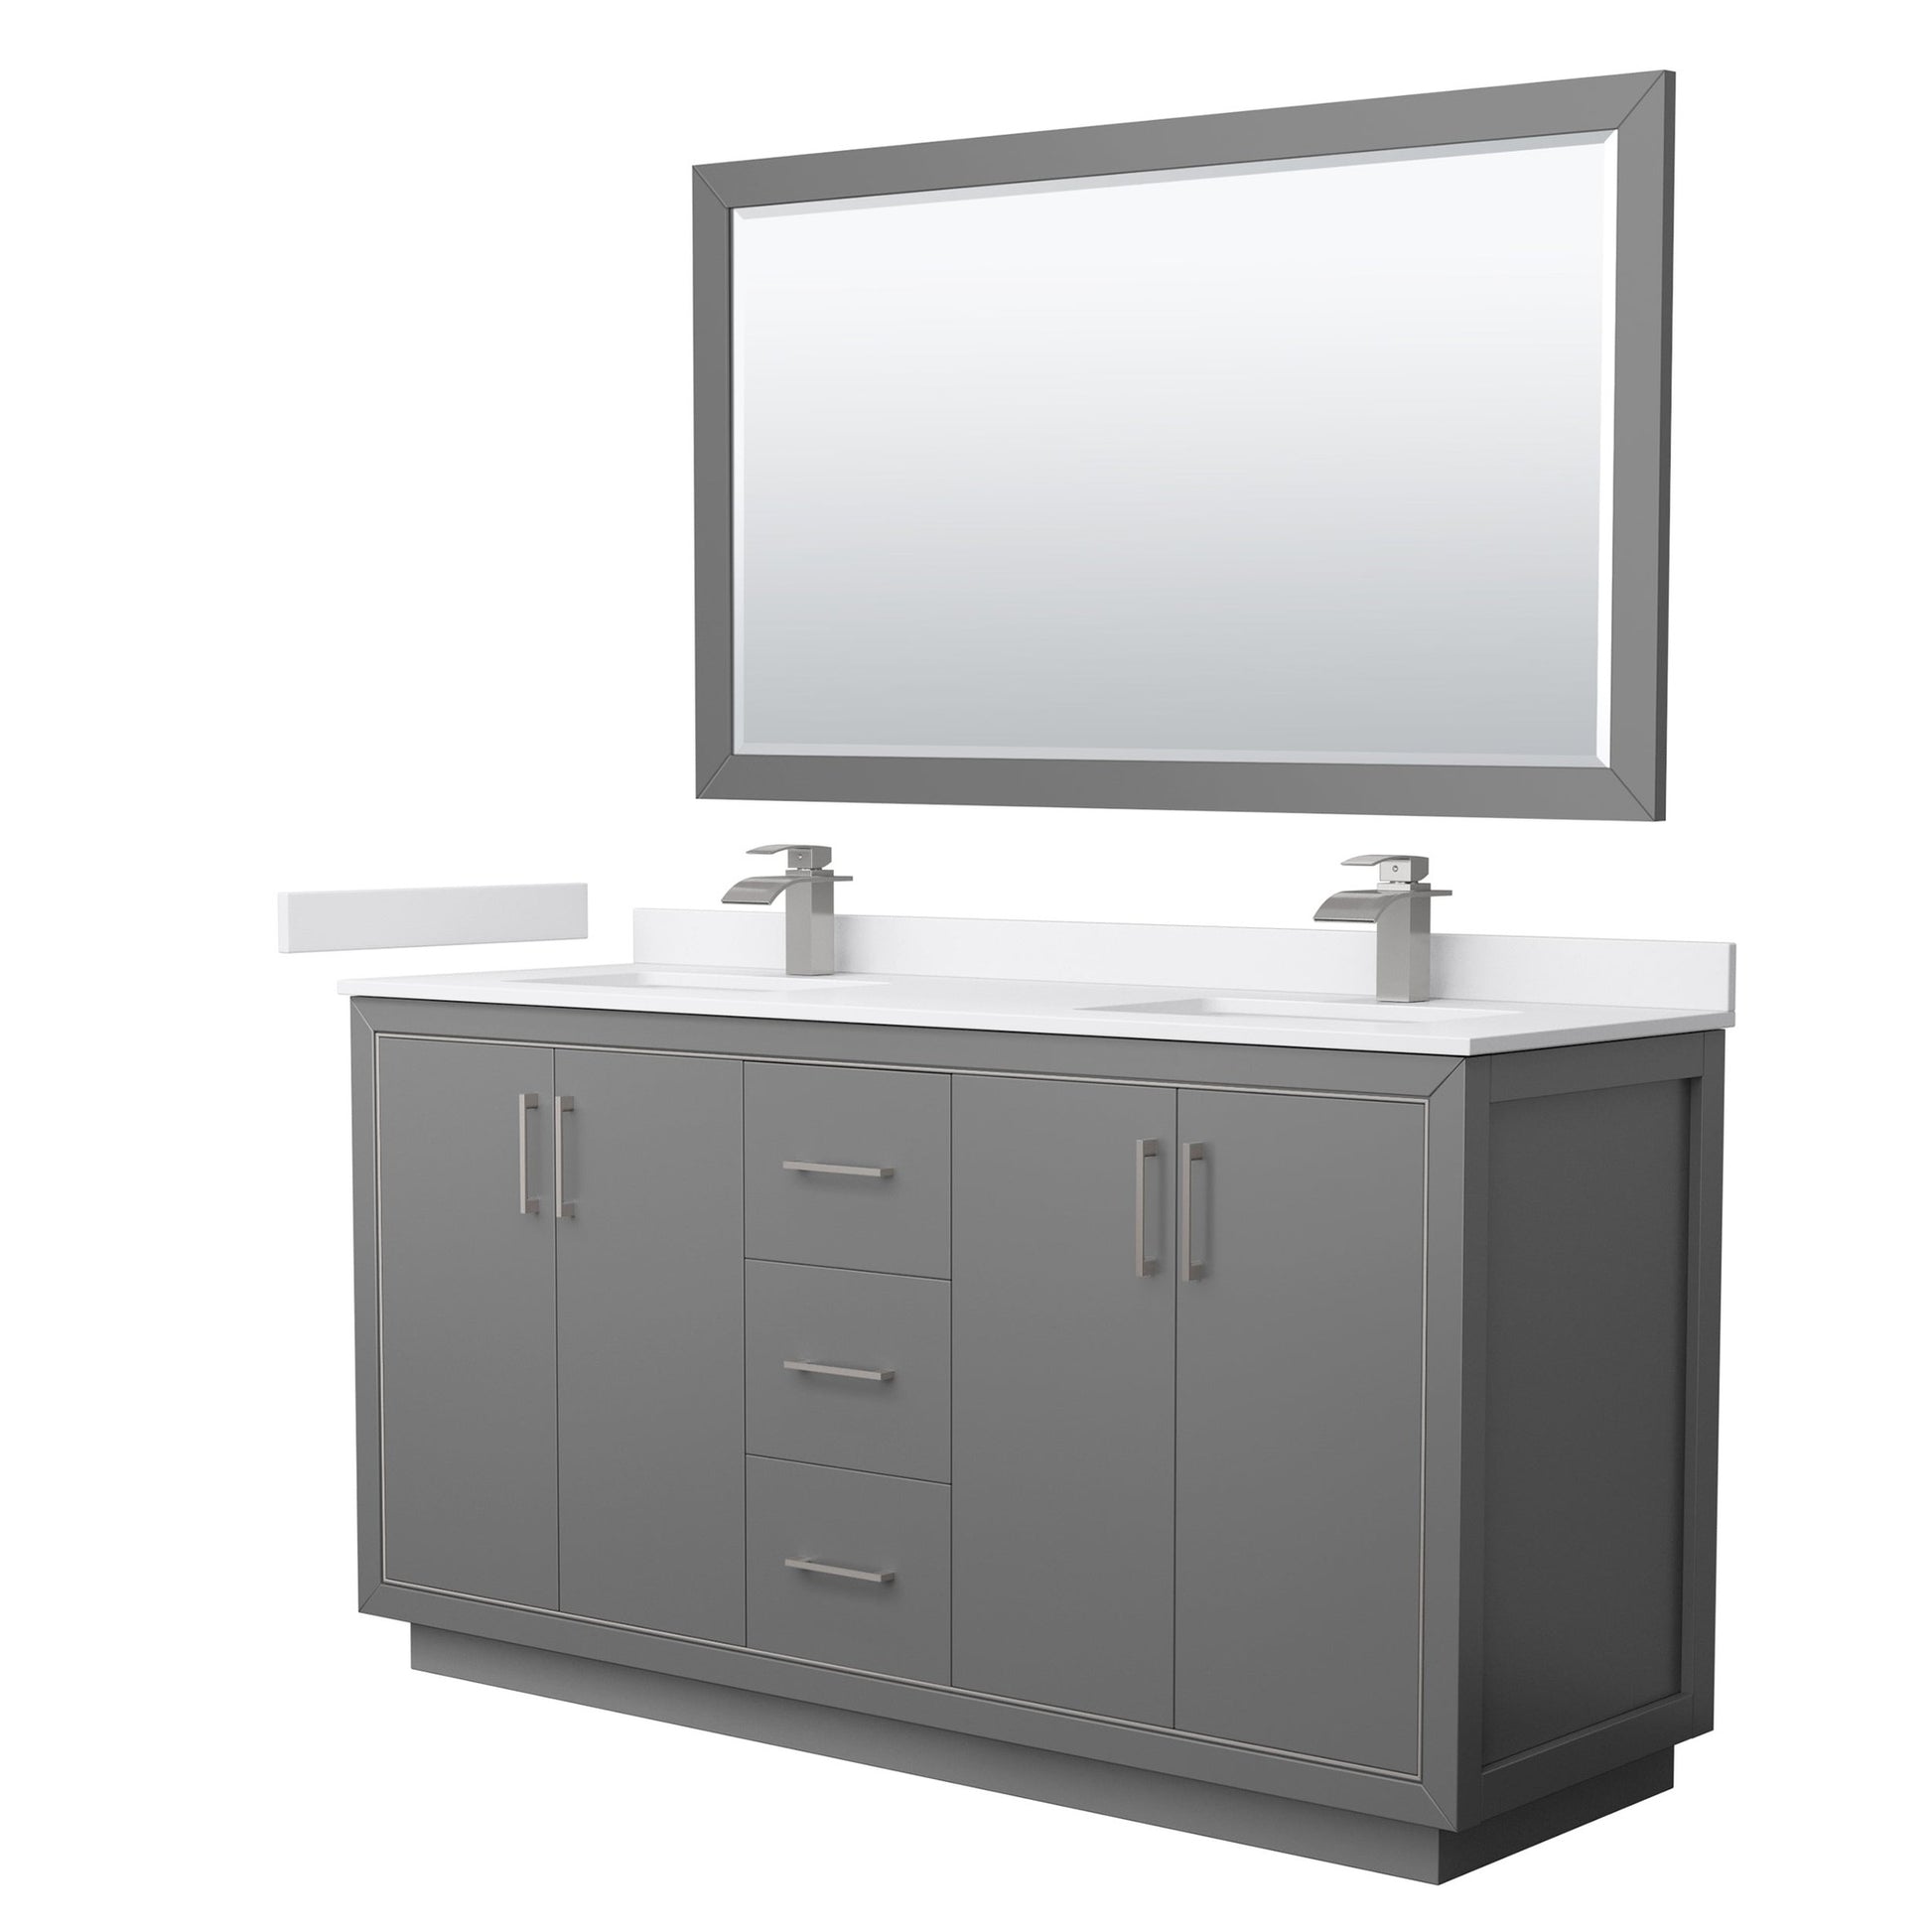 Wyndham Collection Icon 66" Double Bathroom Vanity in Dark Gray, White Cultured Marble Countertop, Undermount Square Sinks, Brushed Nickel Trim, 58" Mirror